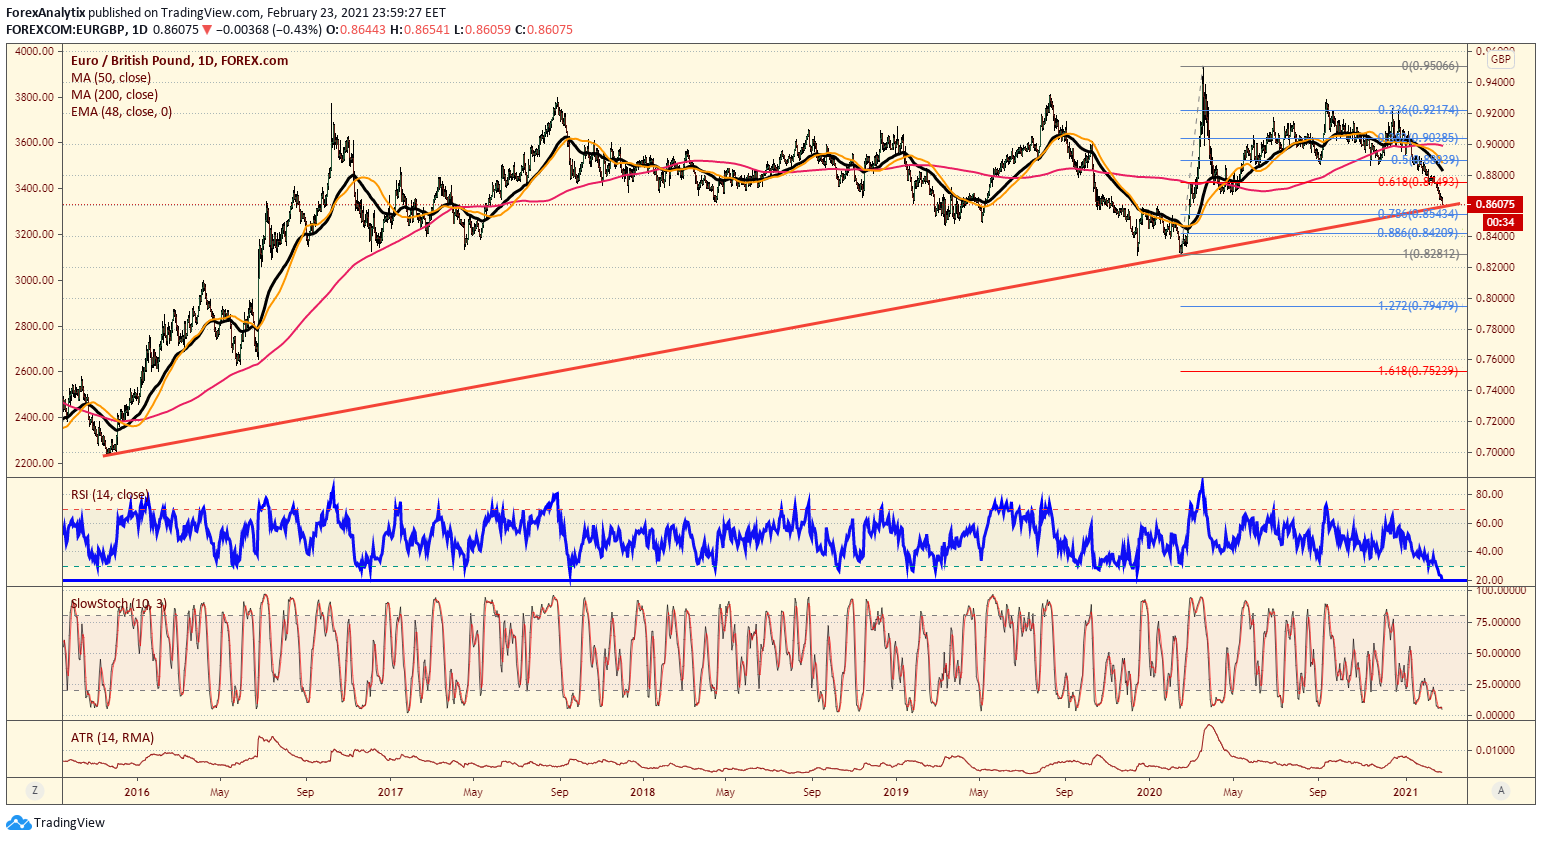 EUR/GBP Daily Chart.